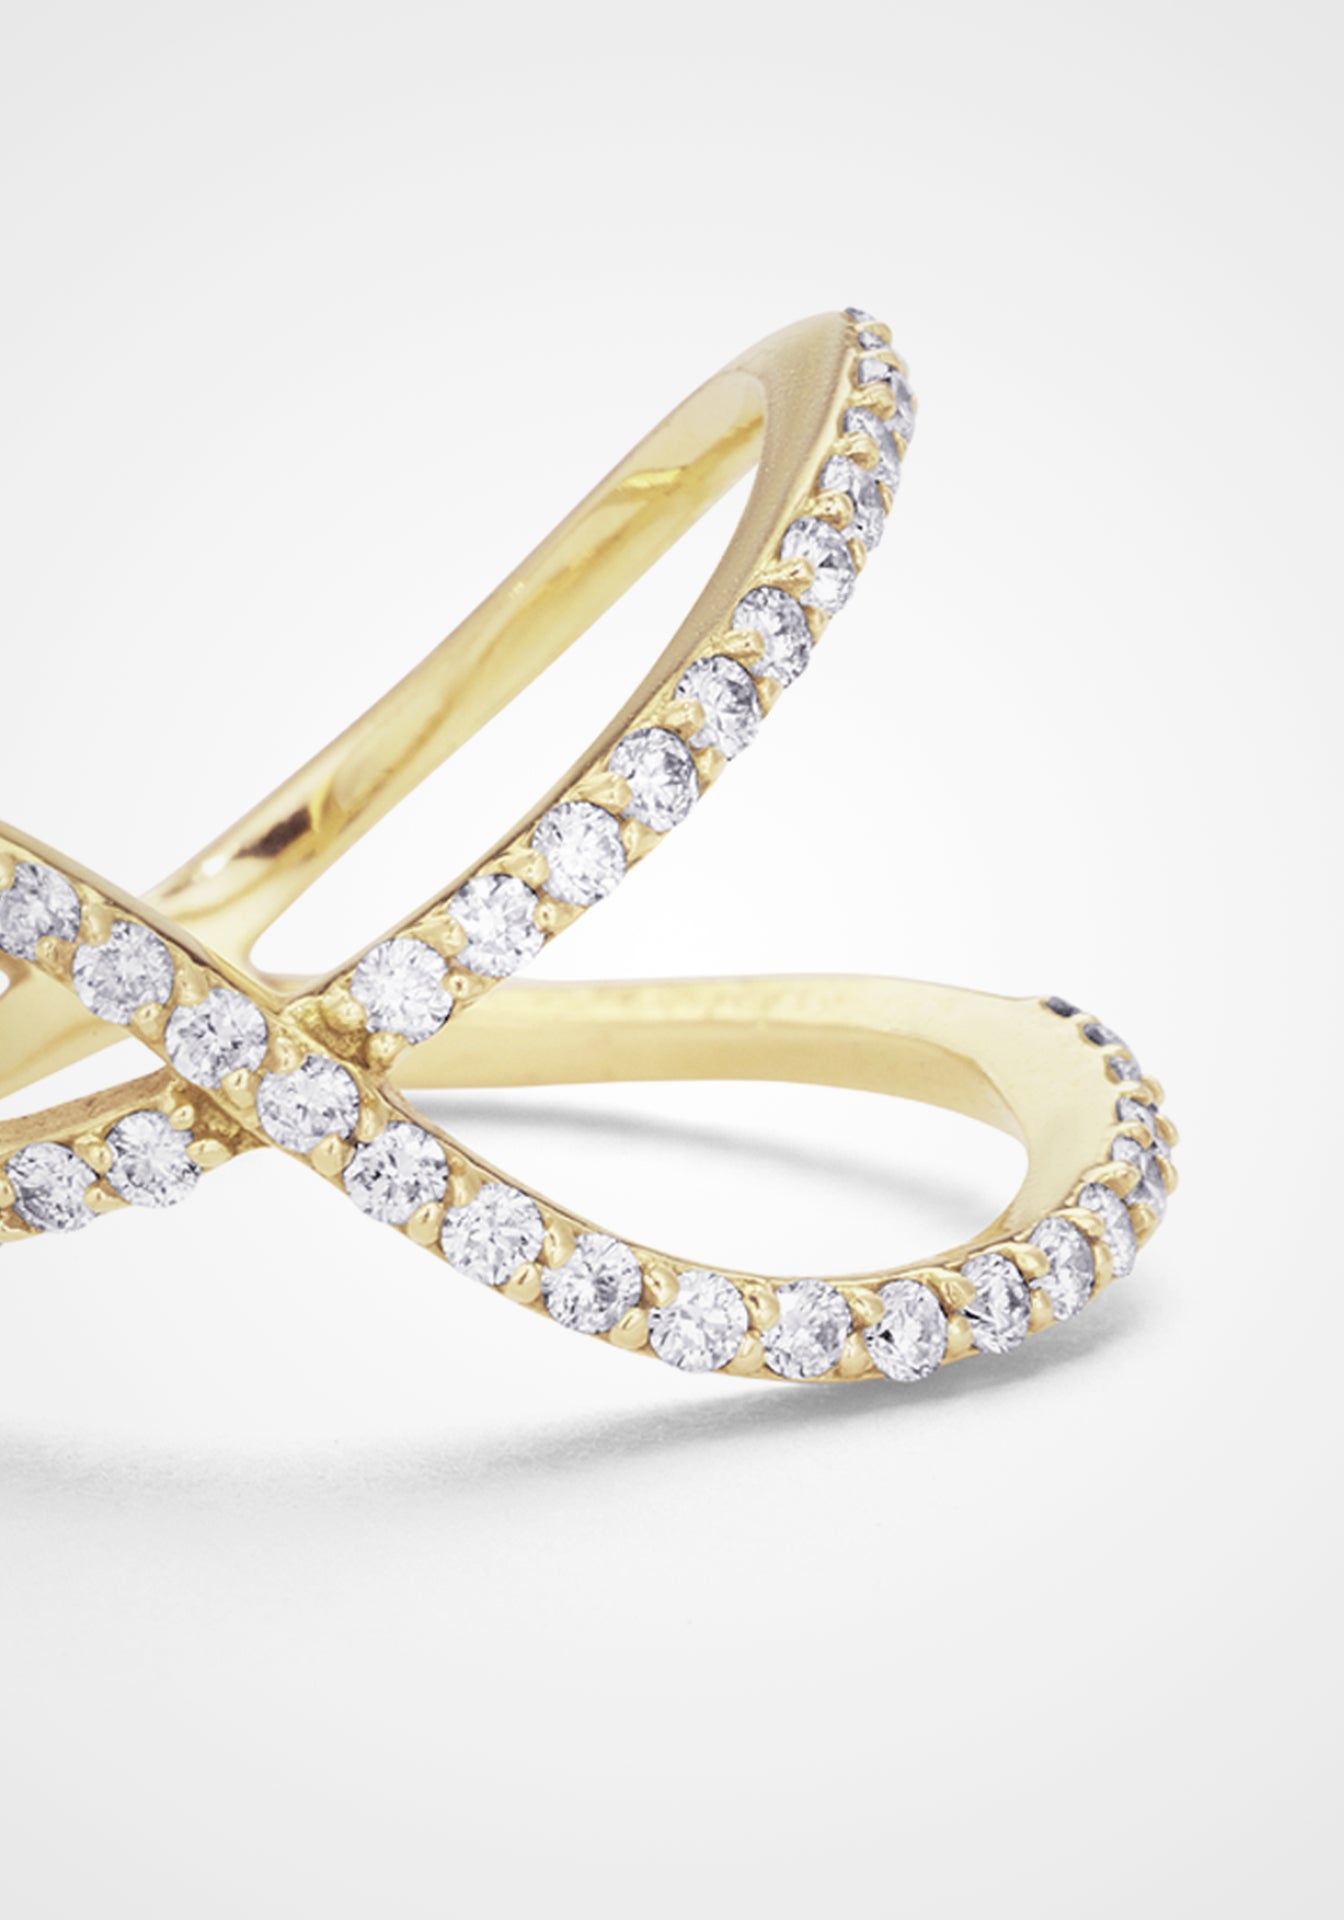 Flou Overlapping Two Row Ring with Diamond Pave - PAIGE NOVICK